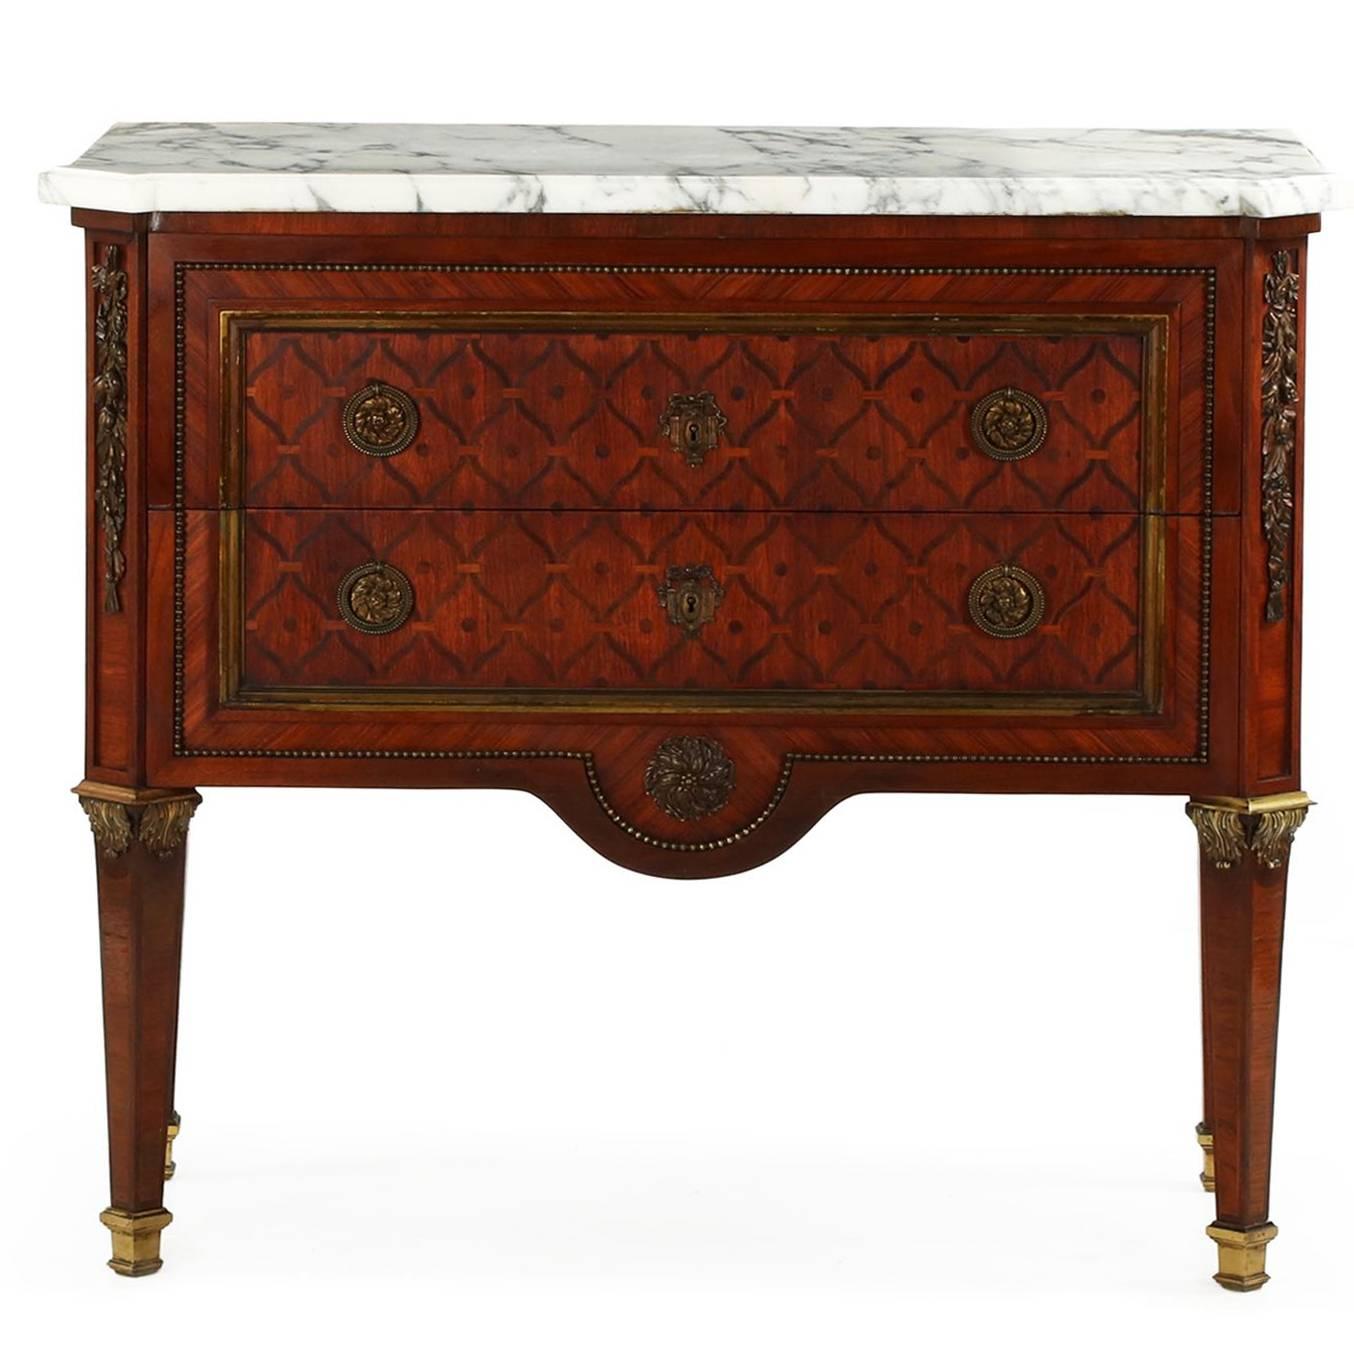 French Neoclassical Bronze and Marble Parquetry Inlaid Commode, circa 1880